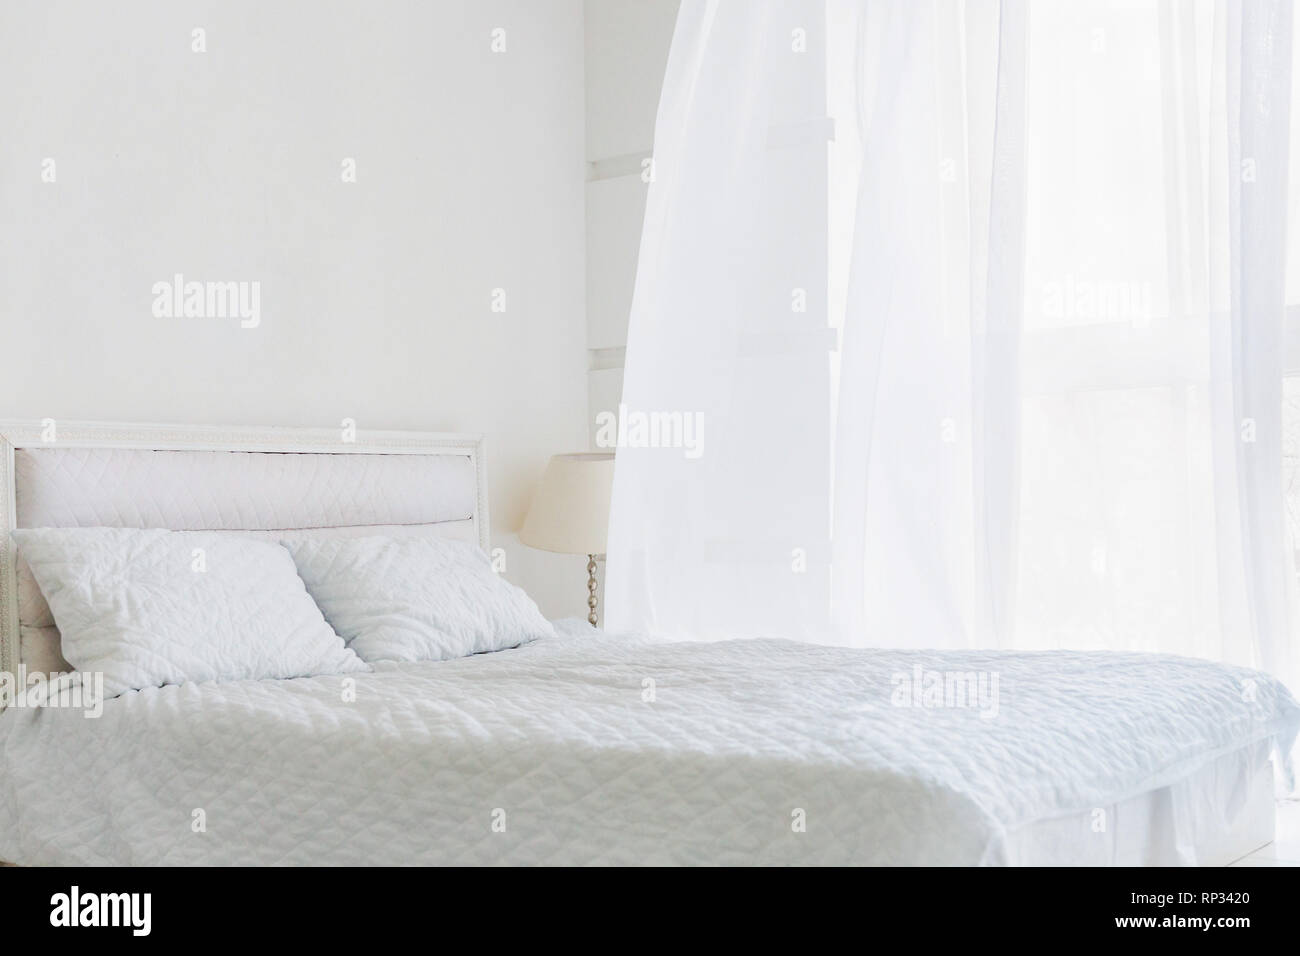 Abstract room with white bed, white walls and window with white curtain Stock Photo